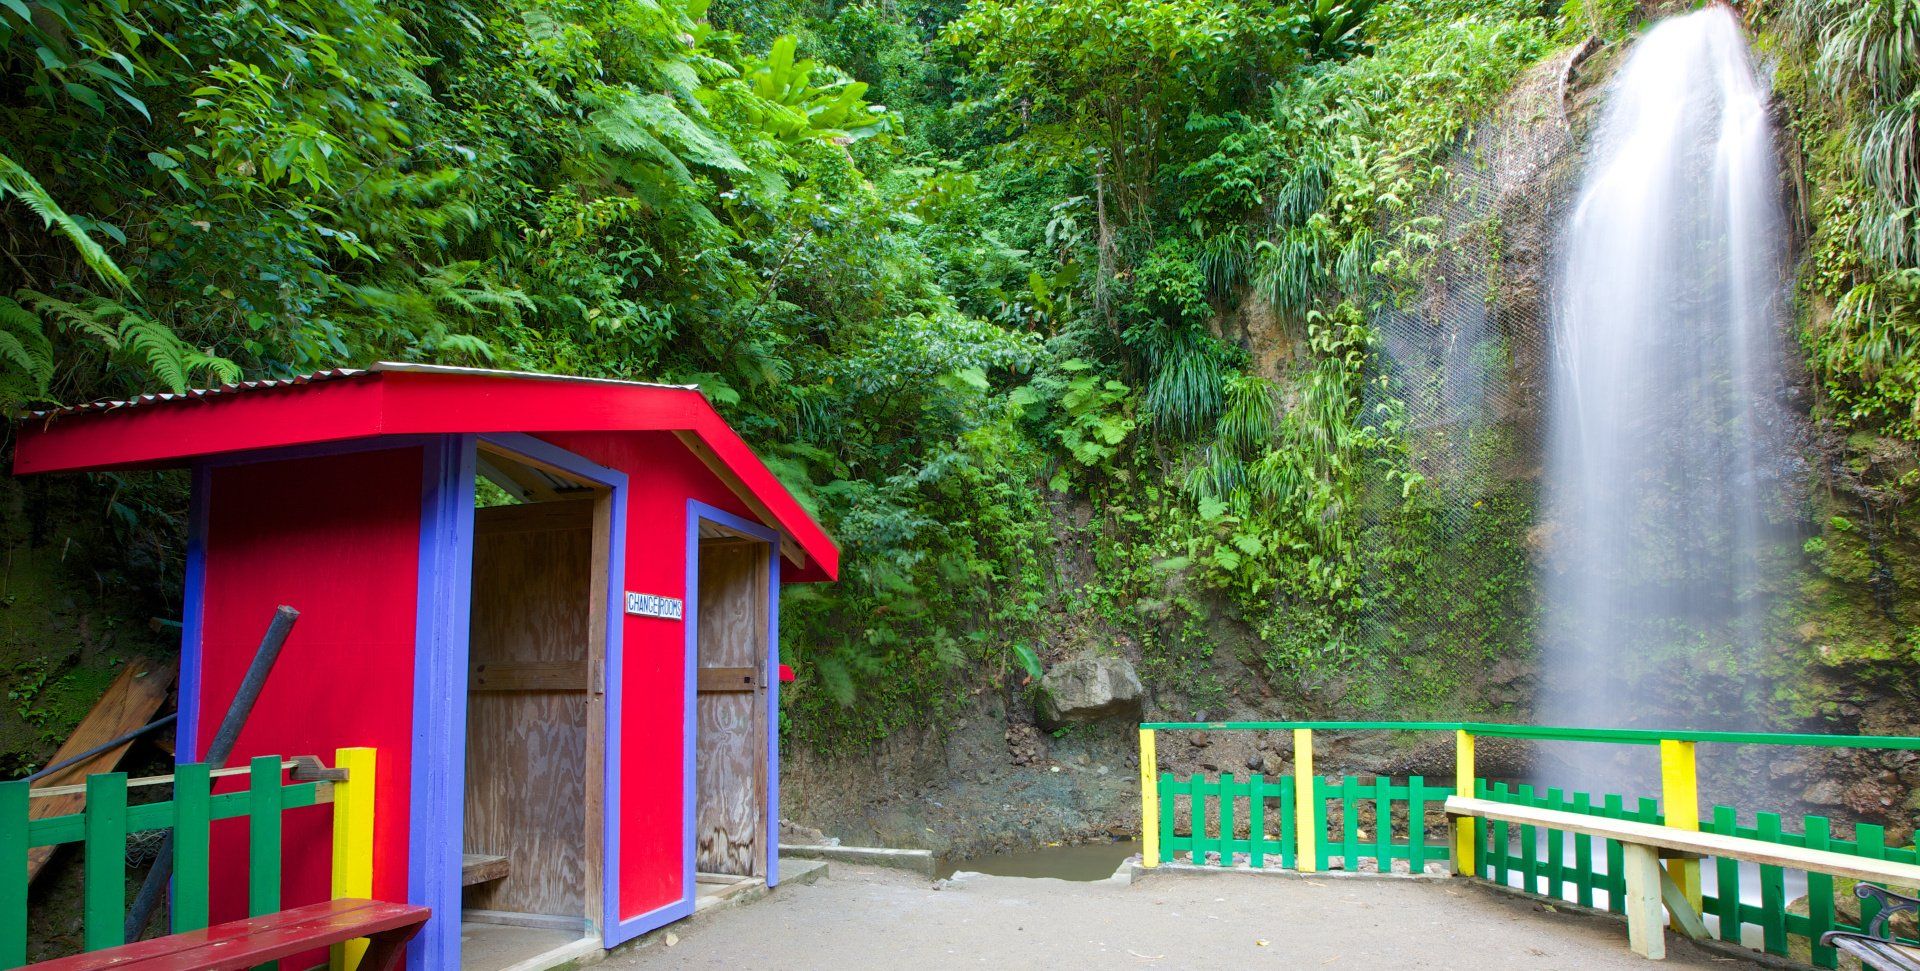 Waterfall behind brightly coloured yellow and green fence and Purple and Red hut